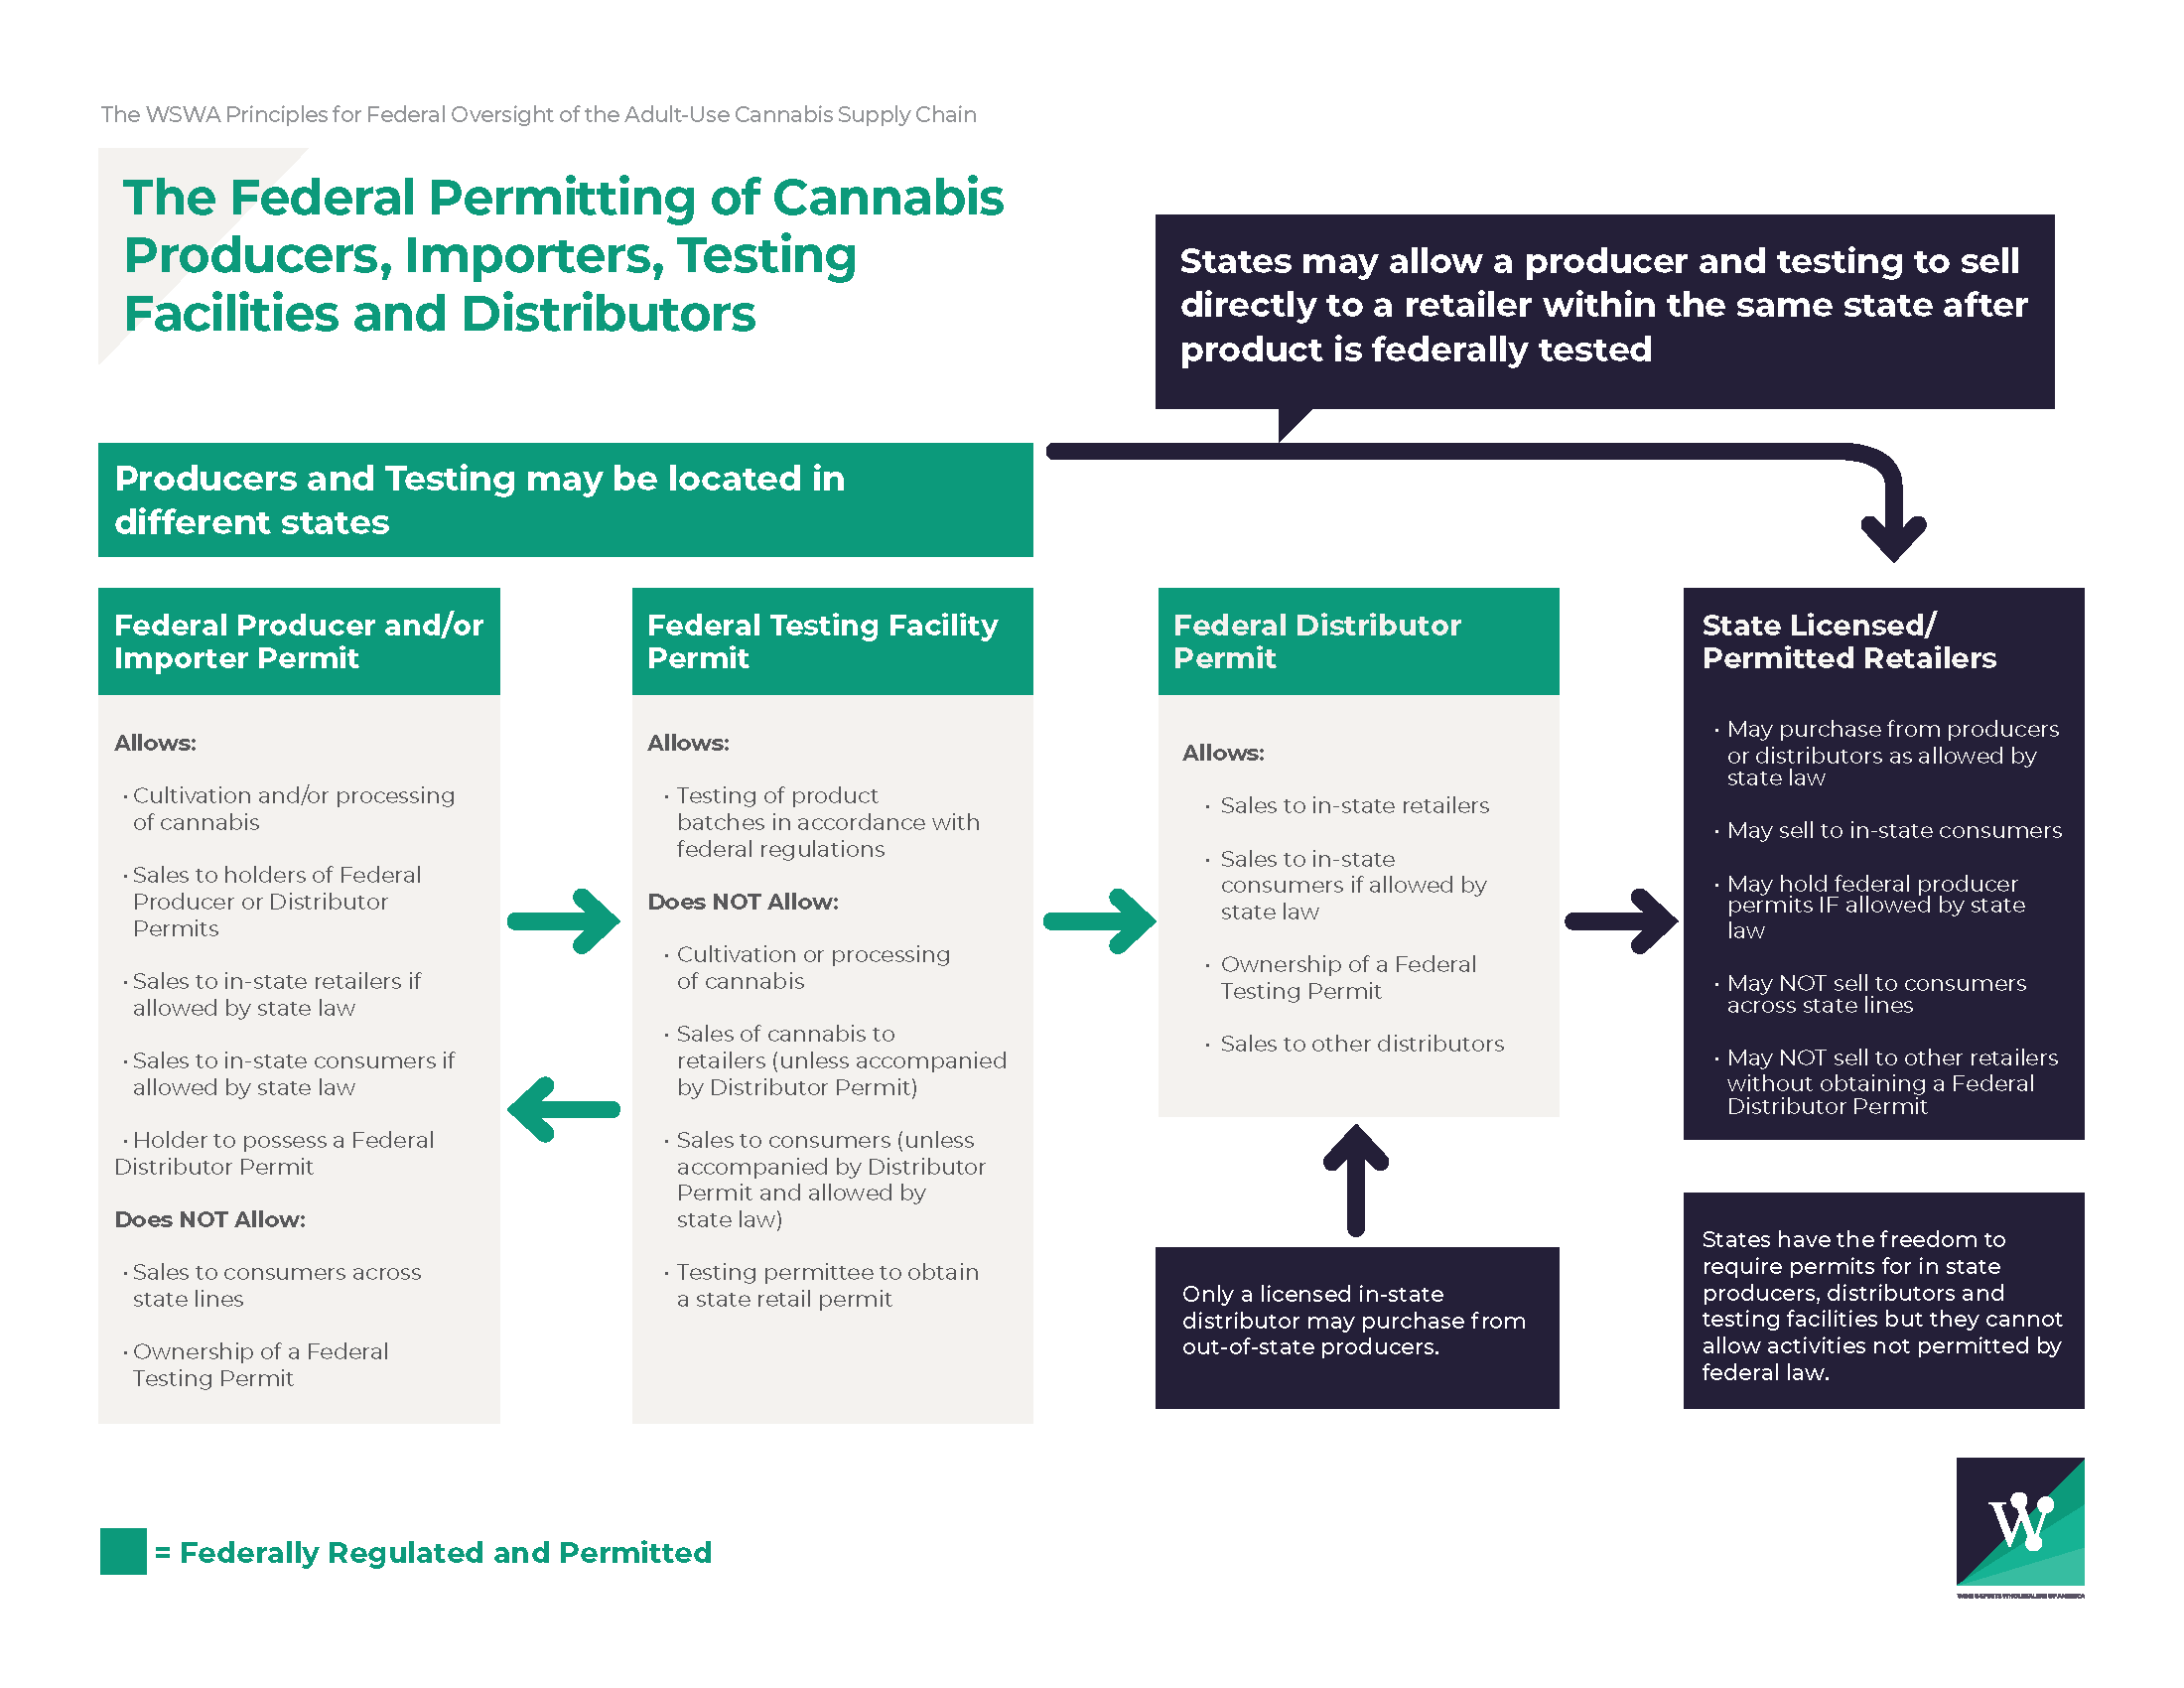 Principles of Permitting Adult-Use Cannabis Federally